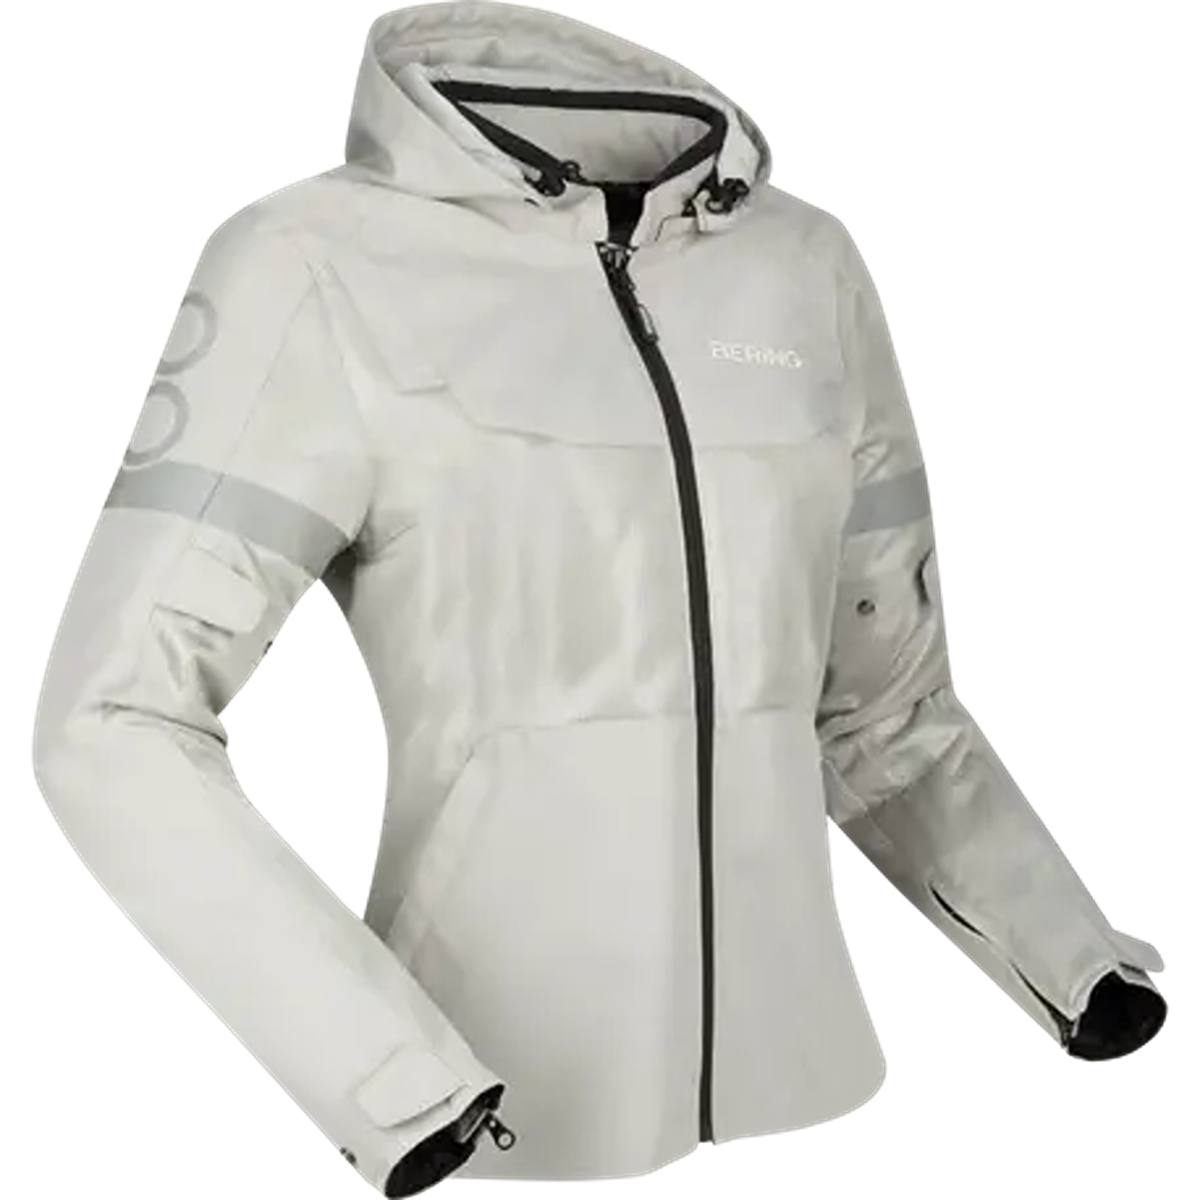 Image of Bering Lady Profil Jacket Grey Black Taille T5